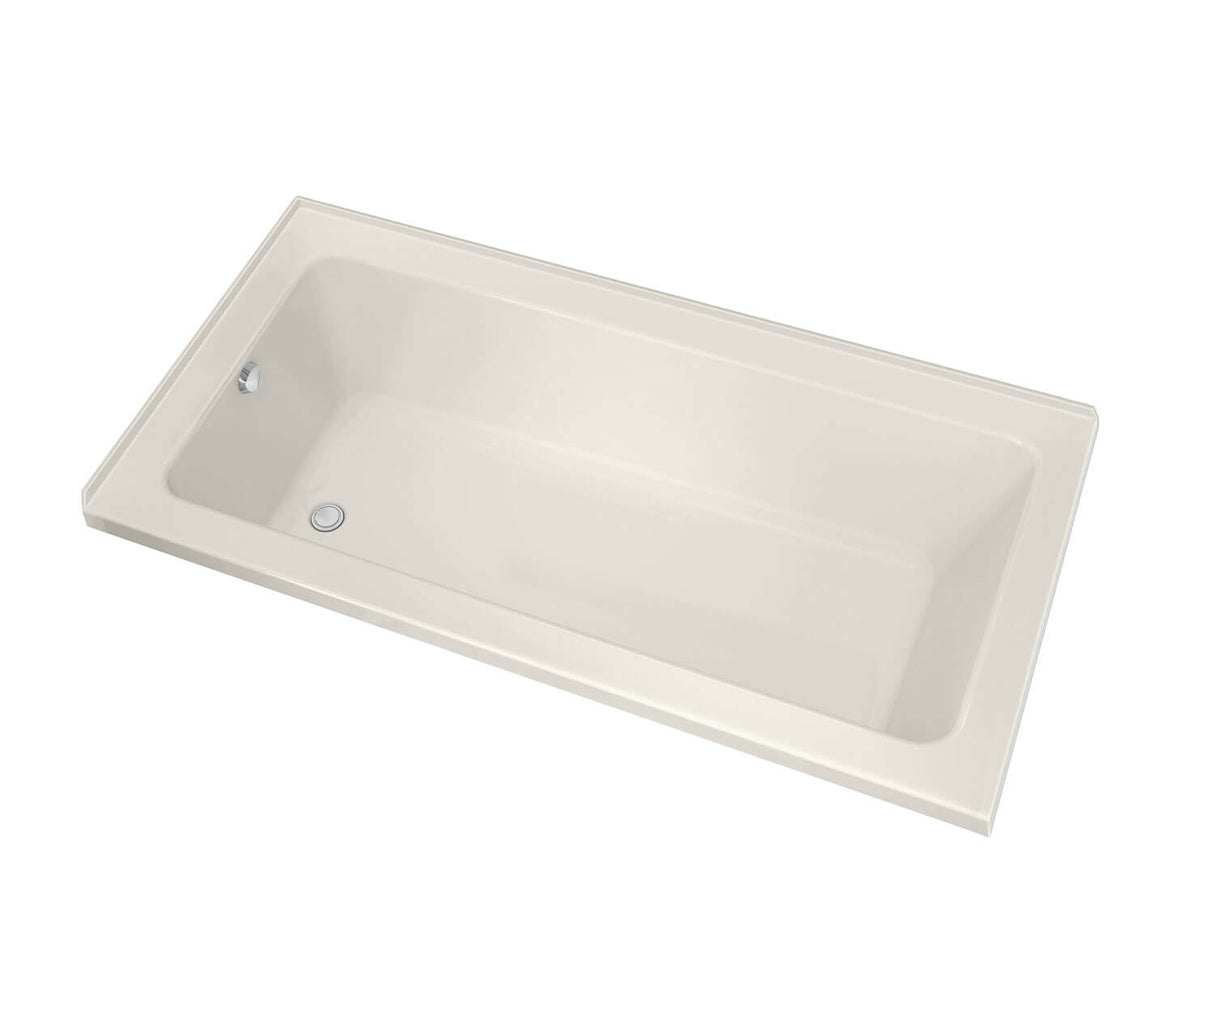 MAAX 106205-R-000-007 Pose 6632 IF Acrylic Corner Left Right-Hand Drain Bathtub in Biscuit